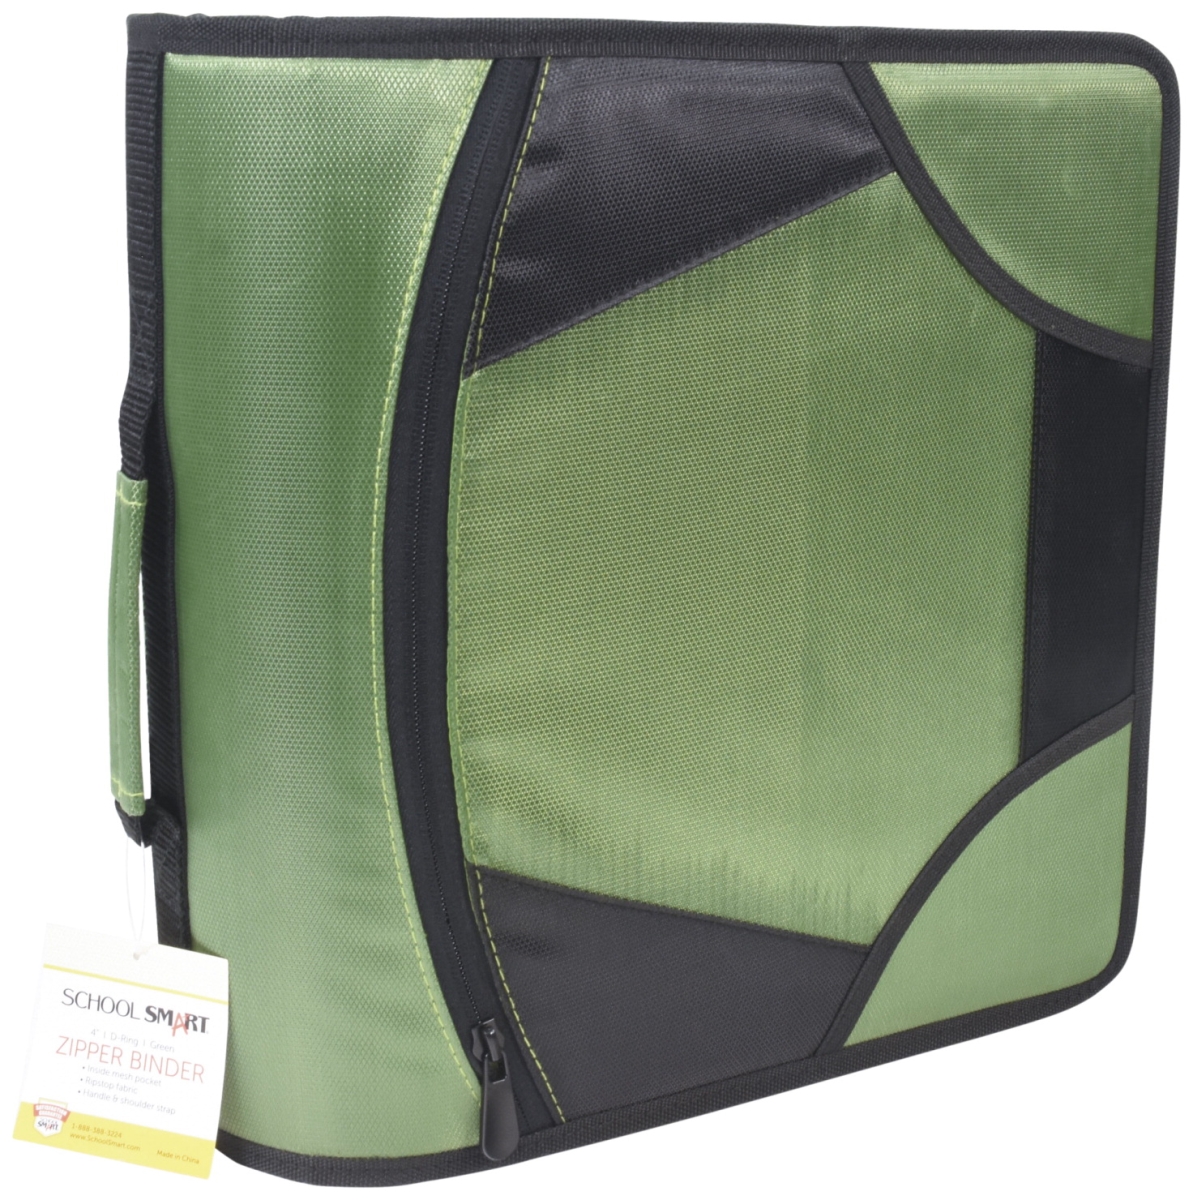 2019471 4 In. D-ring Zipper Binder With Tabs, Green